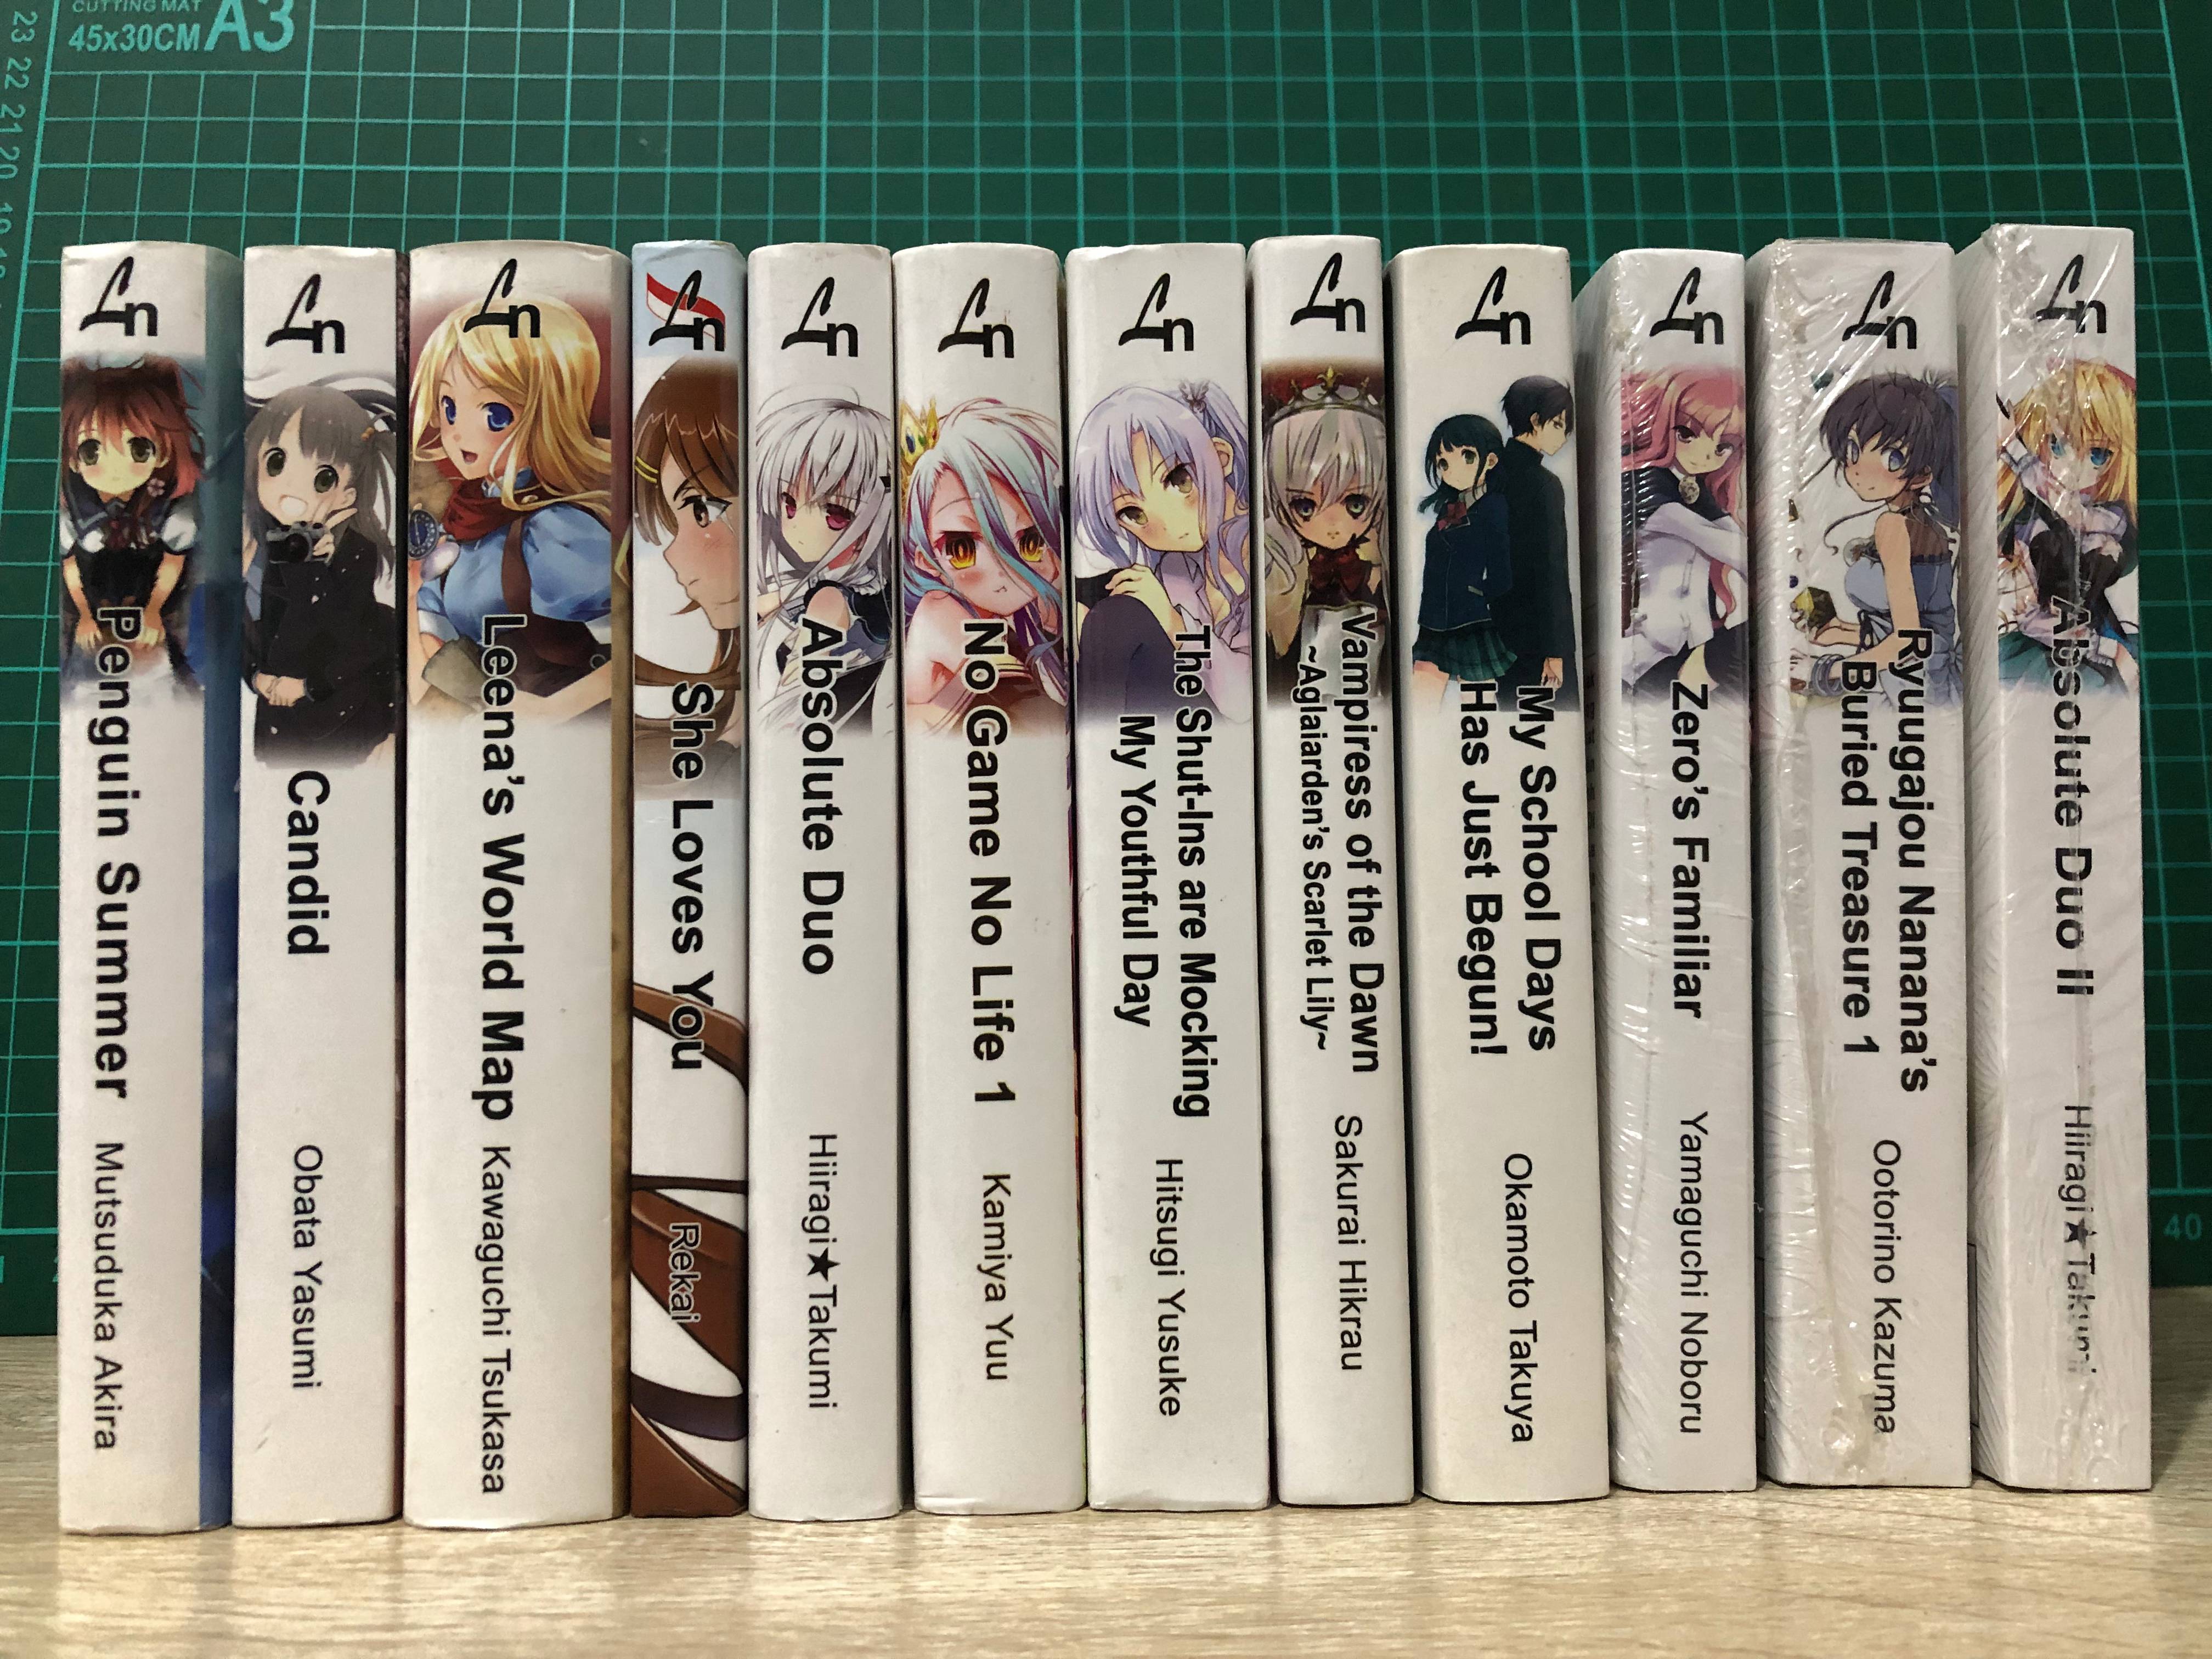 Every LN published by Shiromedia. Ordered by publish date from left (oldest) to right (newest).